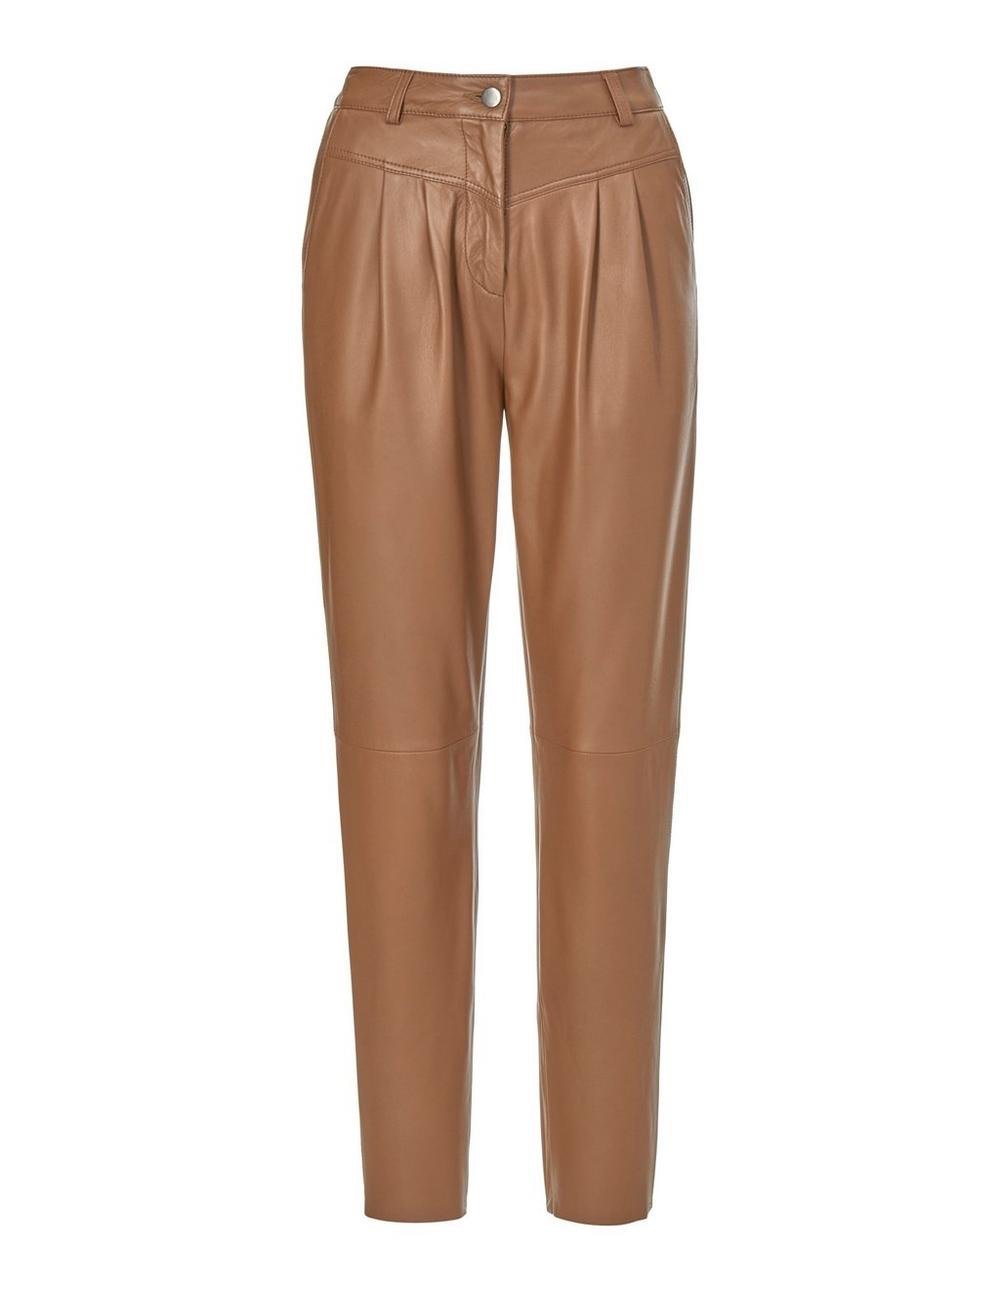 Stretch Leather Pants